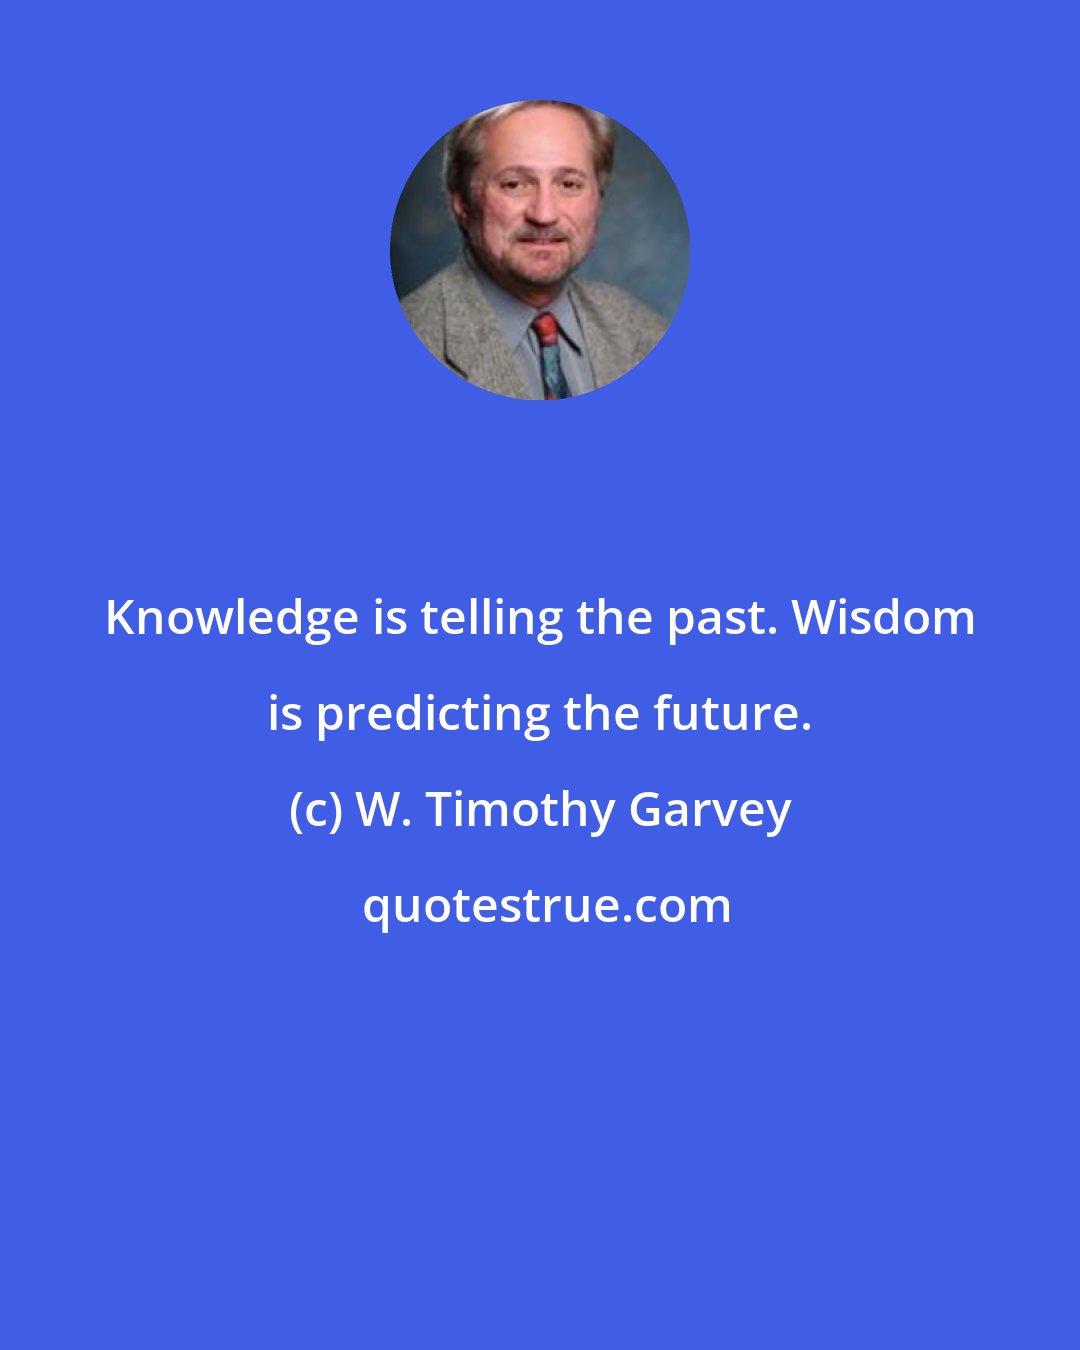 W. Timothy Garvey: Knowledge is telling the past. Wisdom is predicting the future.